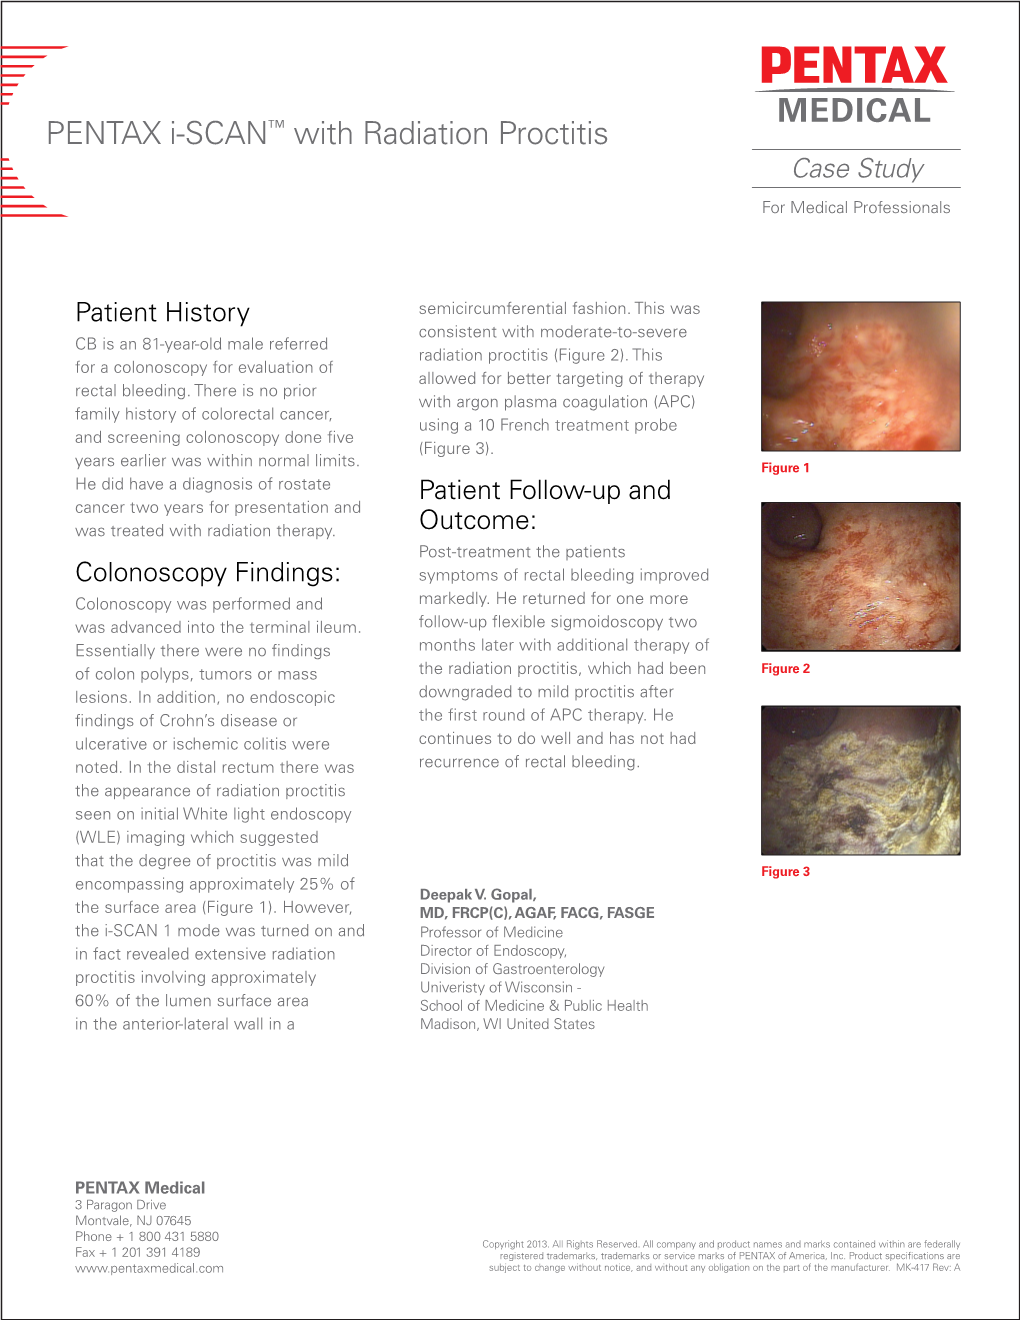 Radiation Proctitis Case Study for Medical Professionals